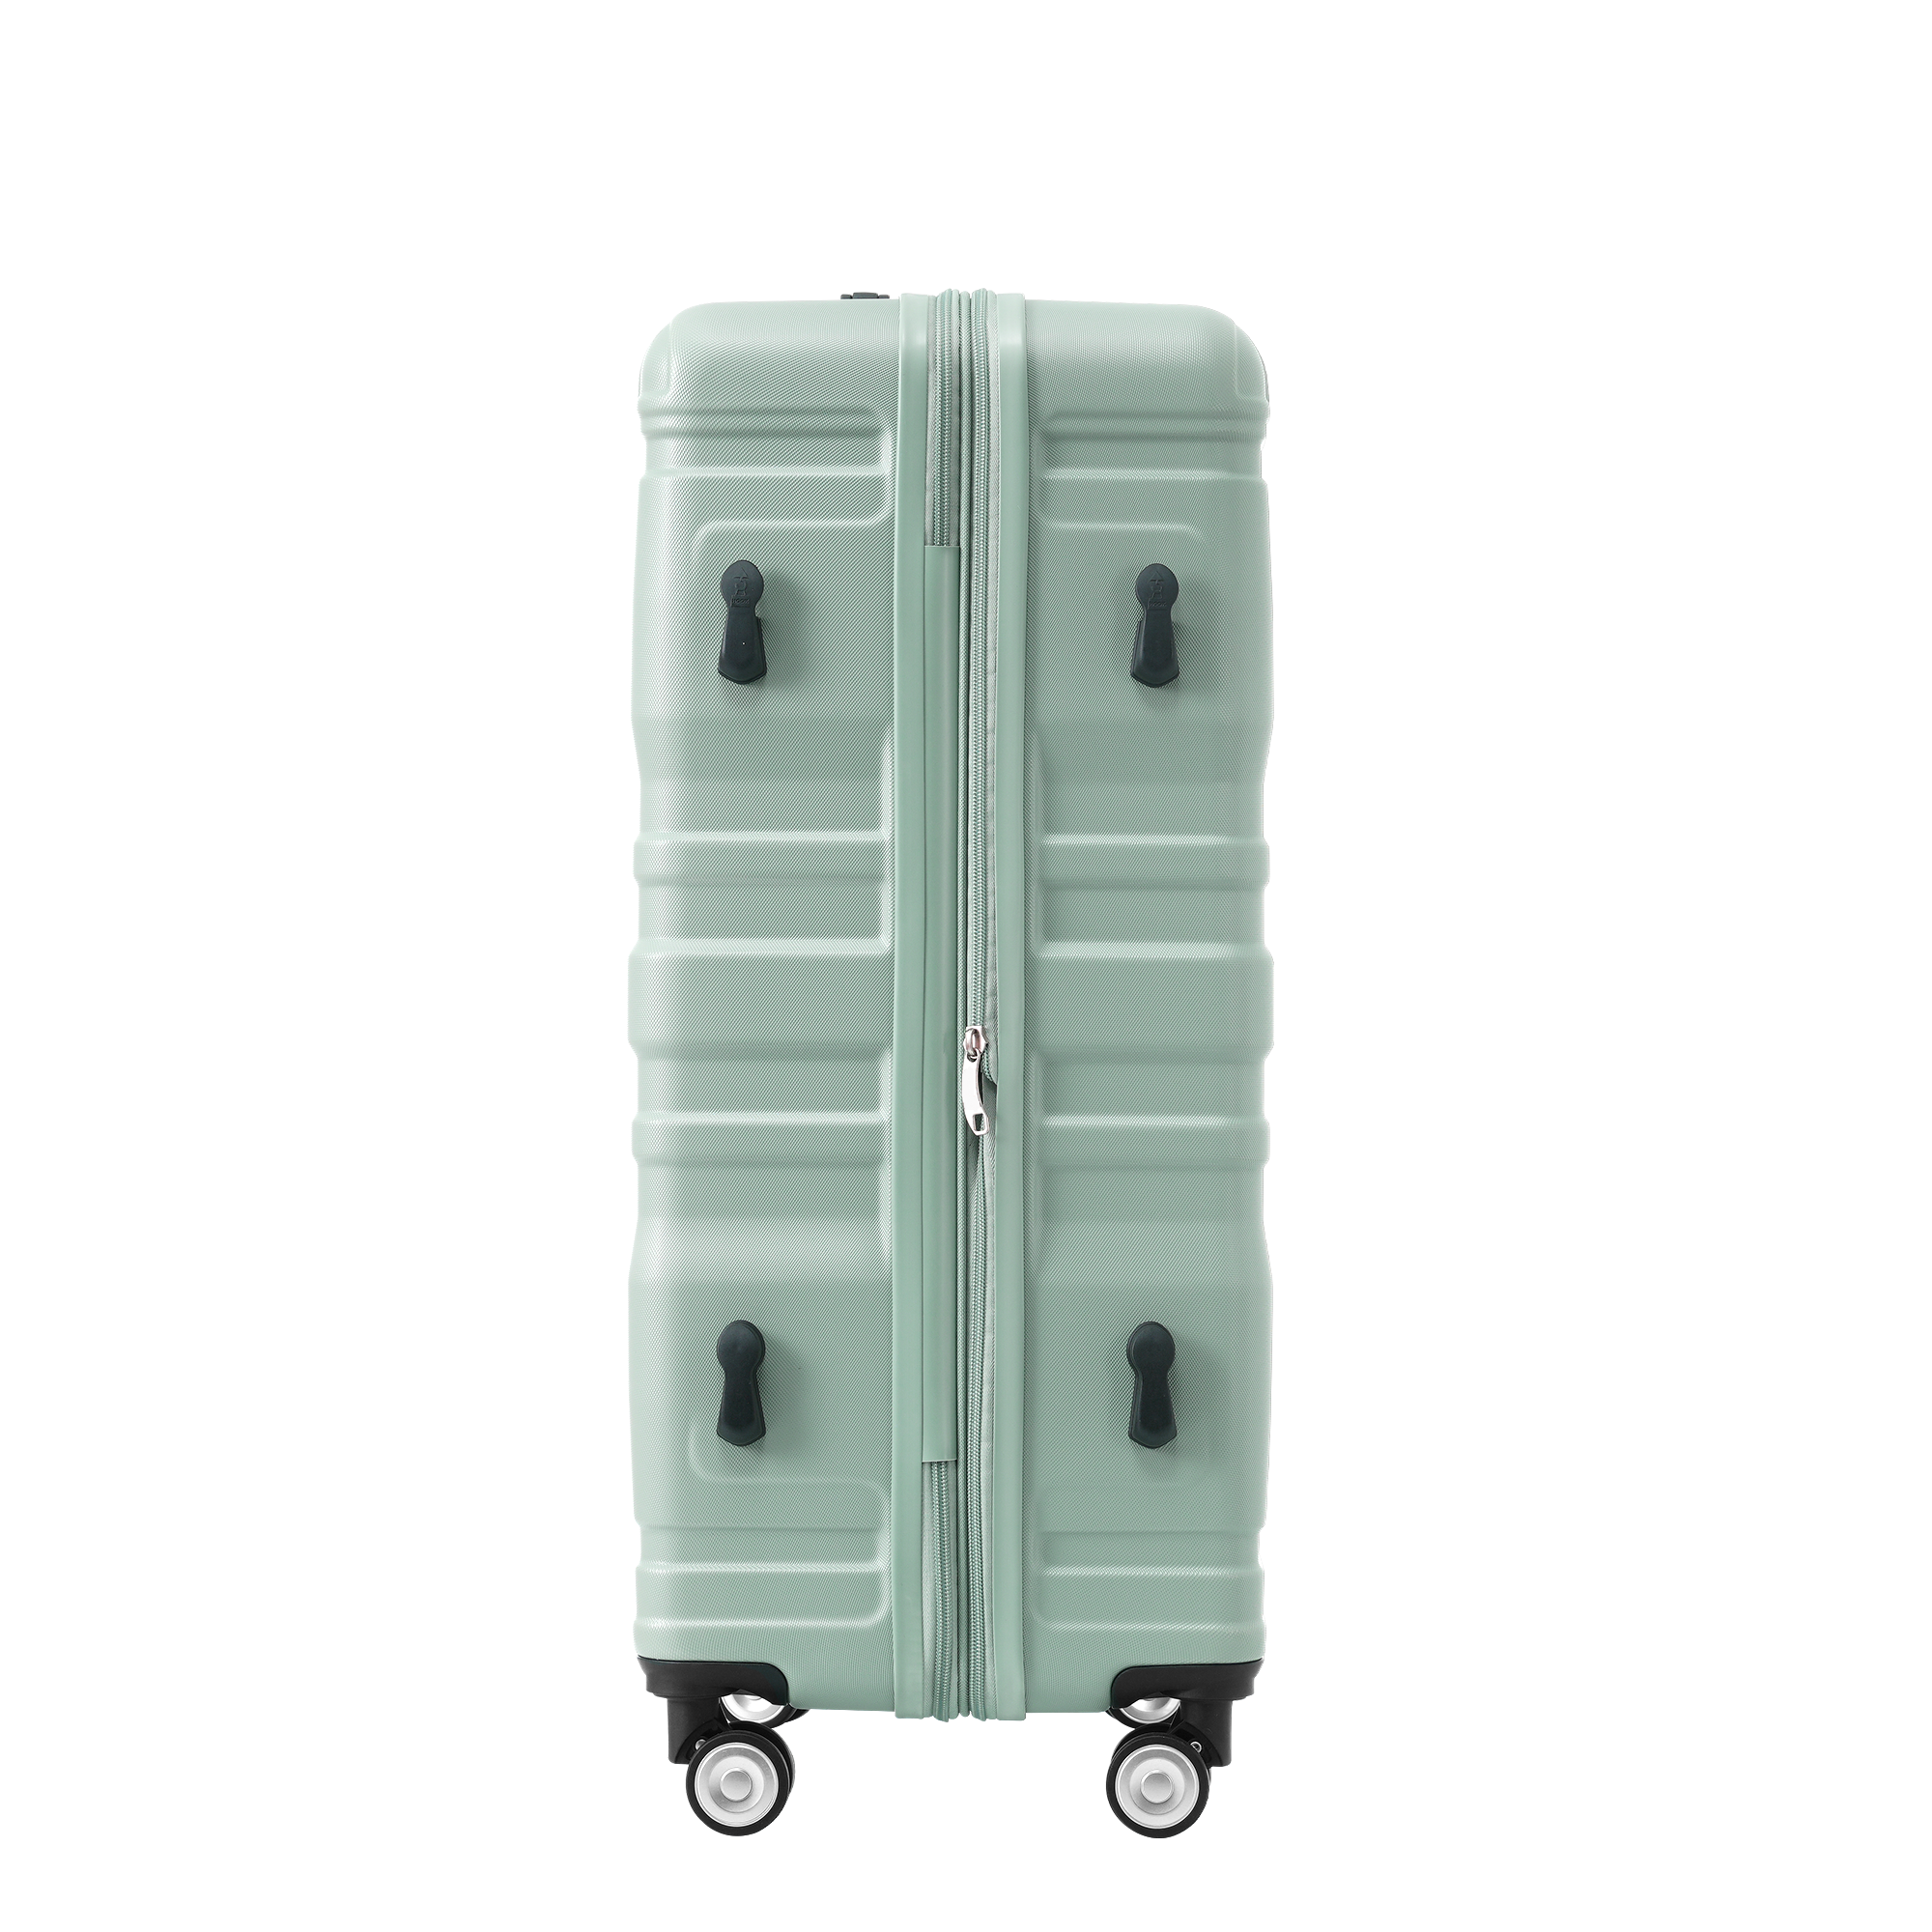 Luggage Sets Model Expandable ABS Hardshell 3pcs light green-abs